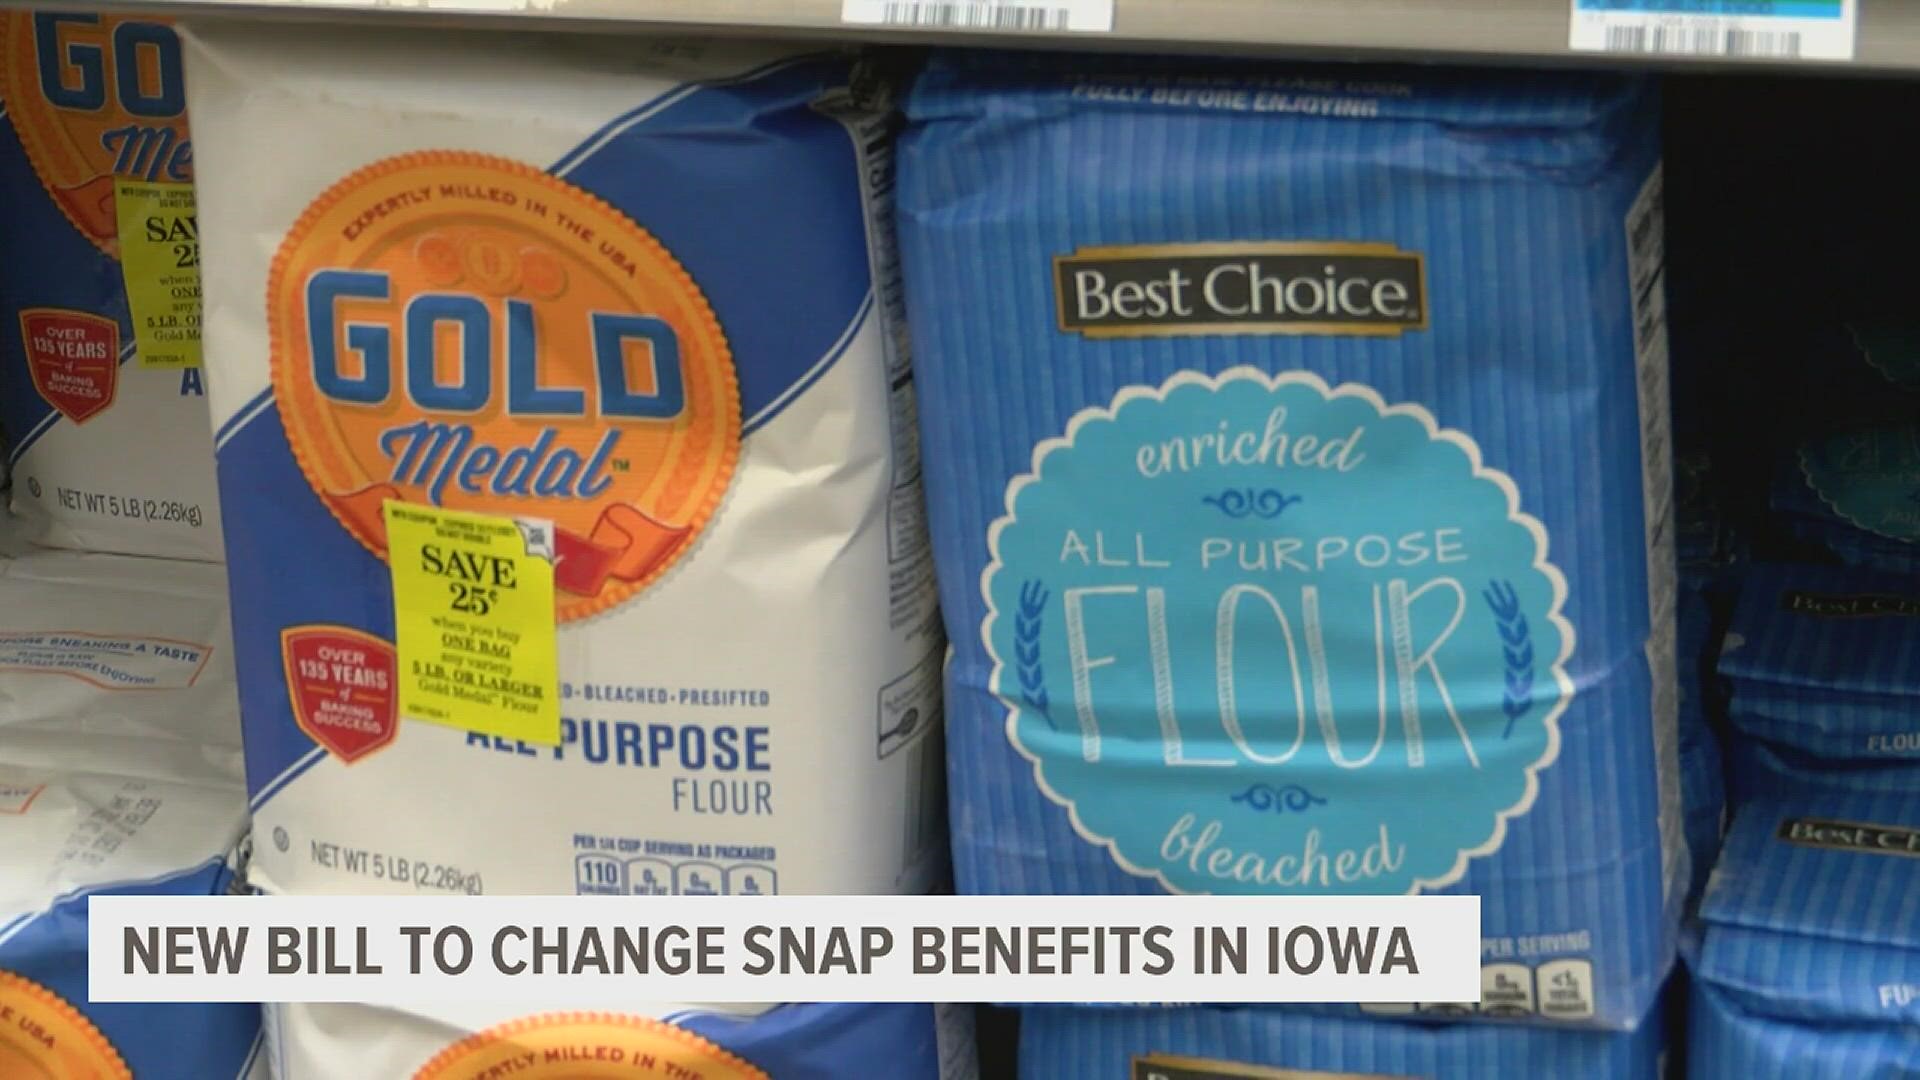 Under the bill, low-income, older and disabled Iowans who rely on these benefits wouldn't be able to purchase items like fresh meat, white bread and American cheese.